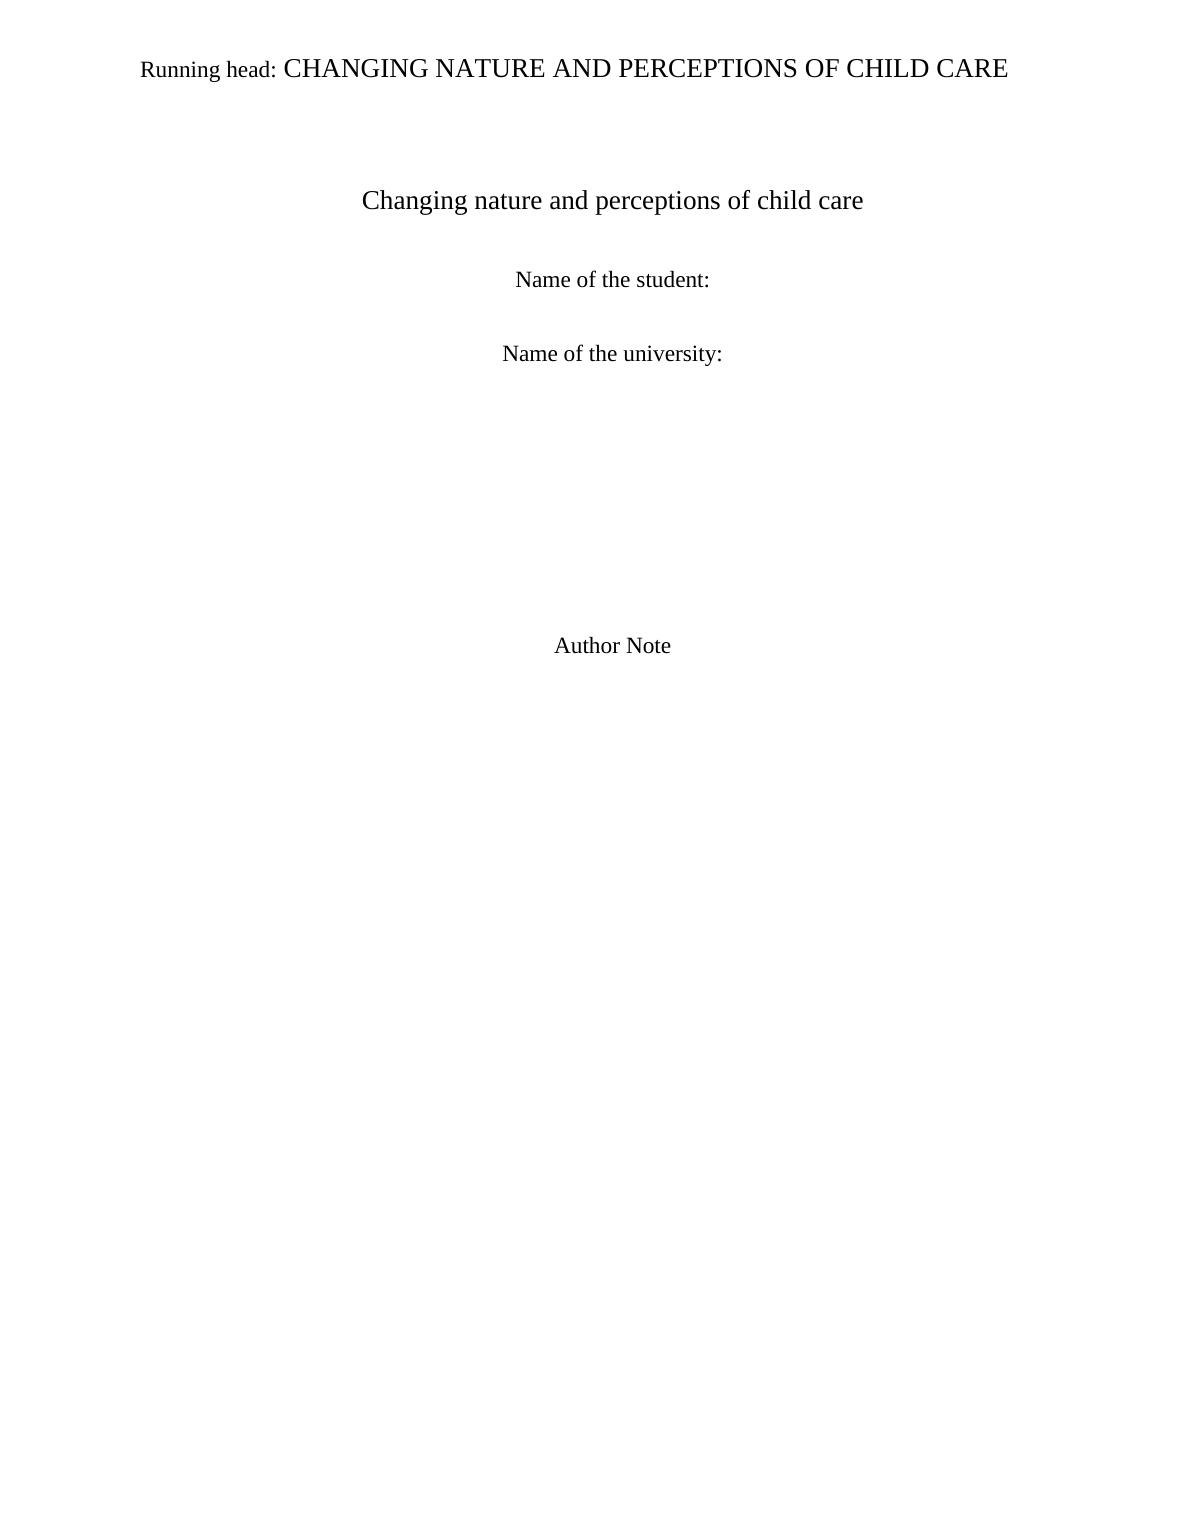 CHANGING NATURE AND PERCEPTIONS OF CHILD CARE_1